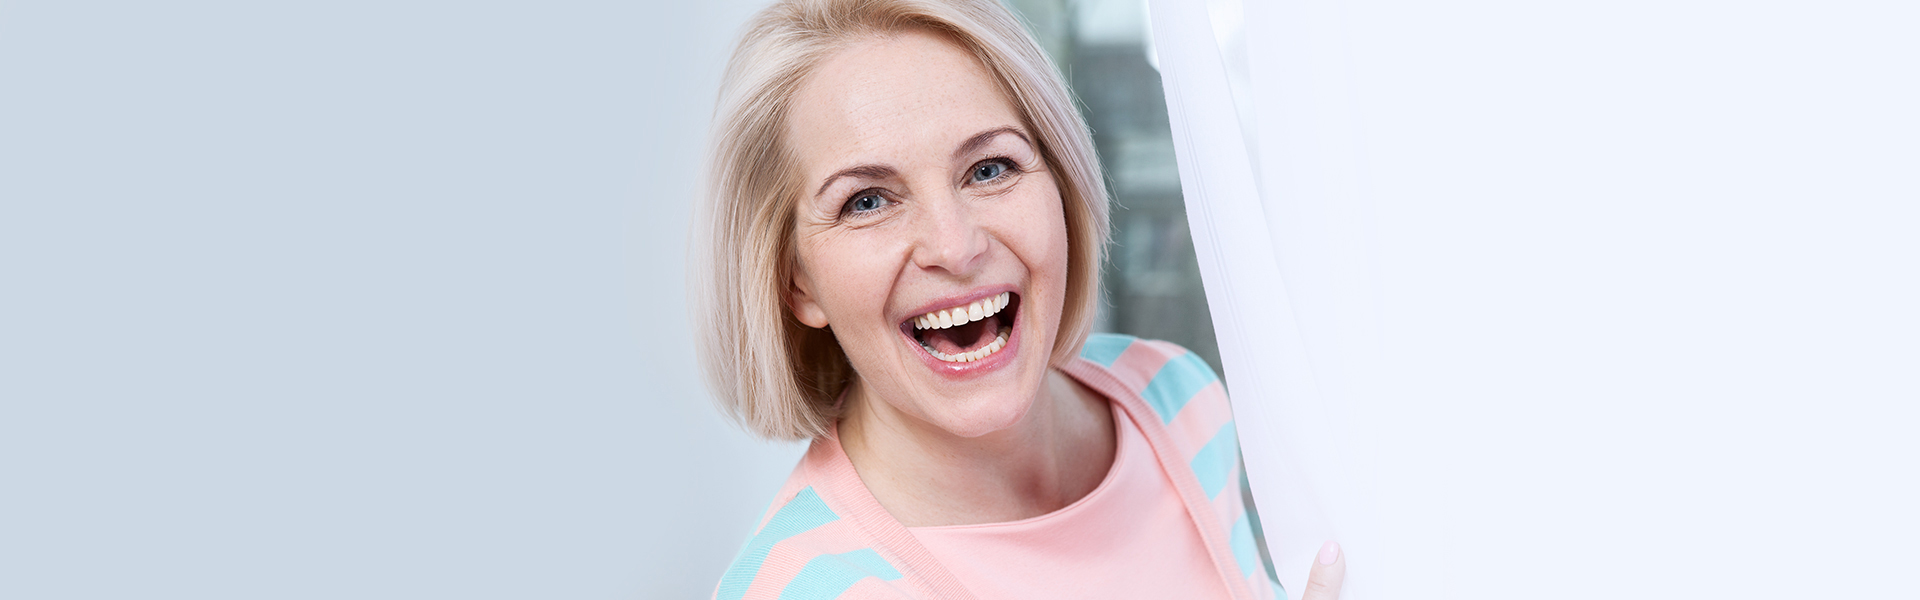 How to Effectively Replace Missing Teeth Using Dentures